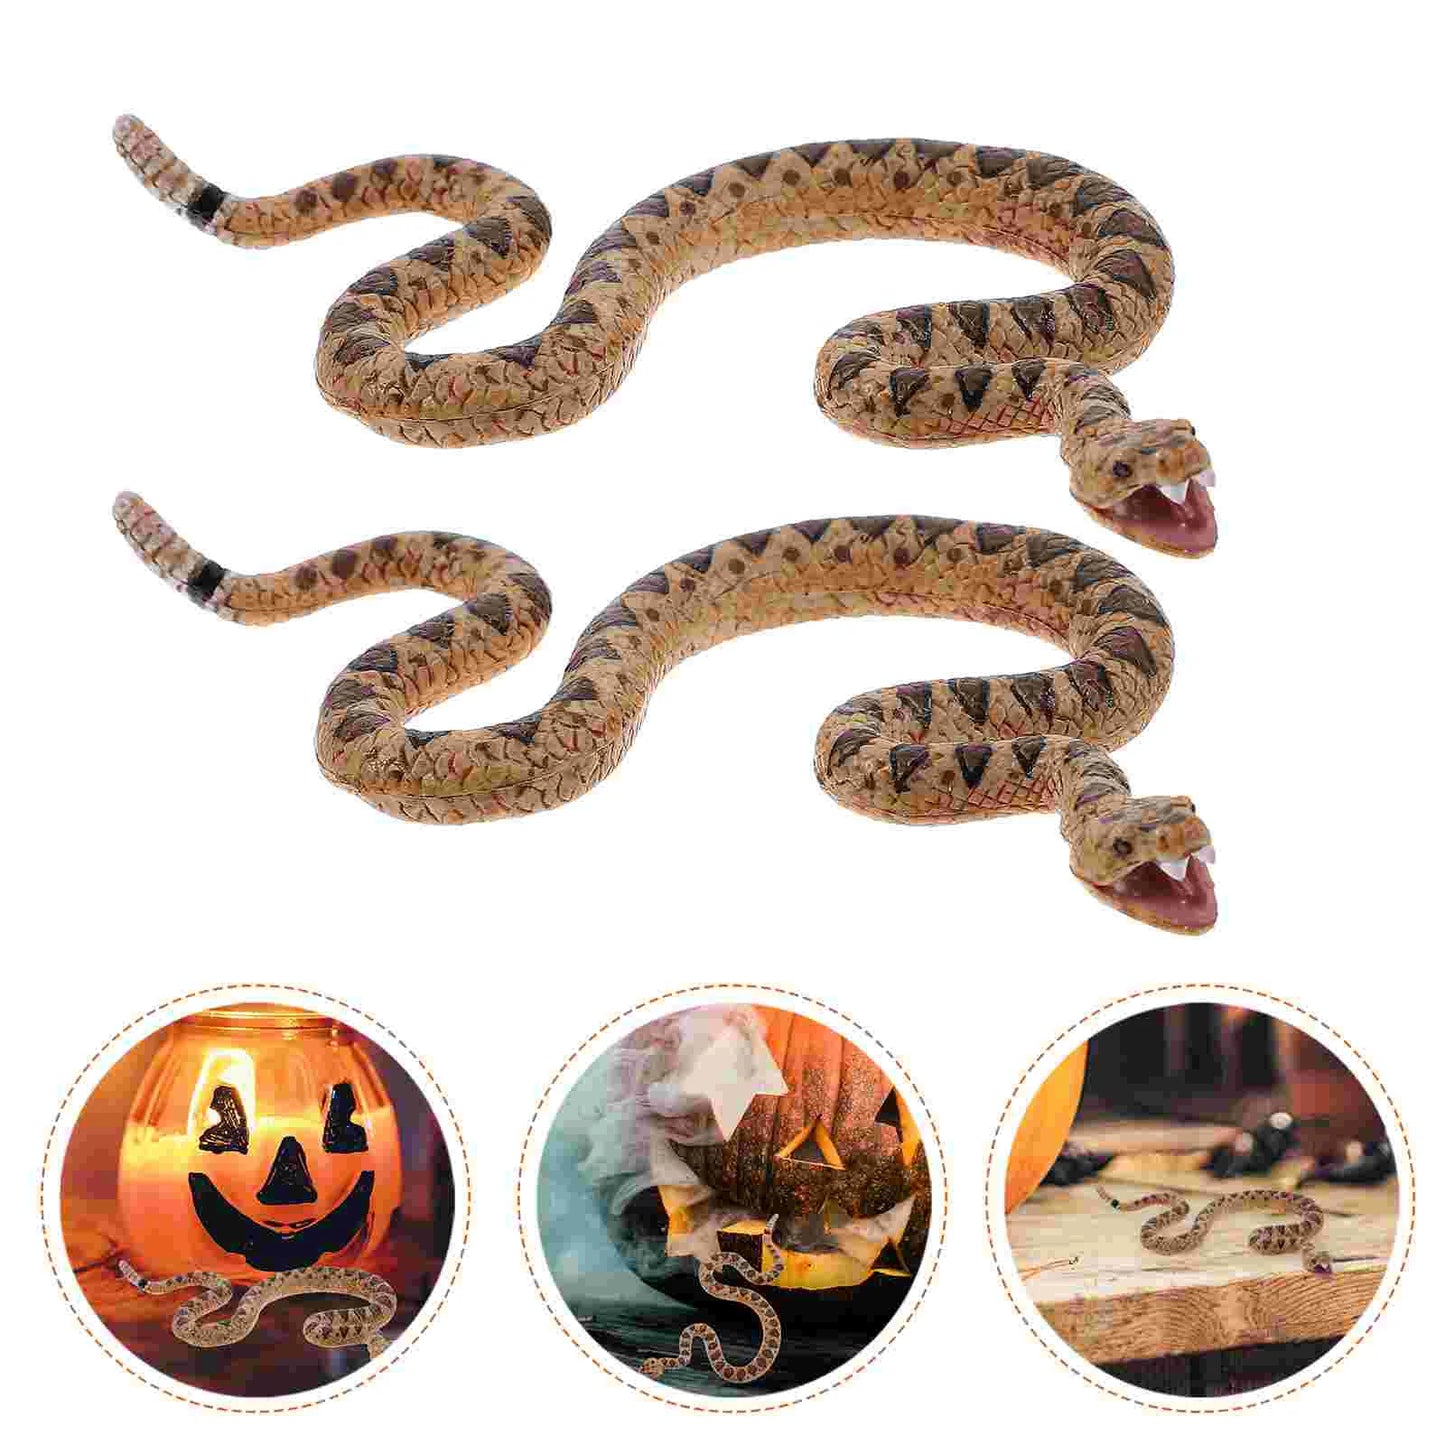 2Pcs Realistic Snakes Simulation Snake Scary Rattlesnake Trick Props Wildlife Educational Plaything for Kids Party Favor